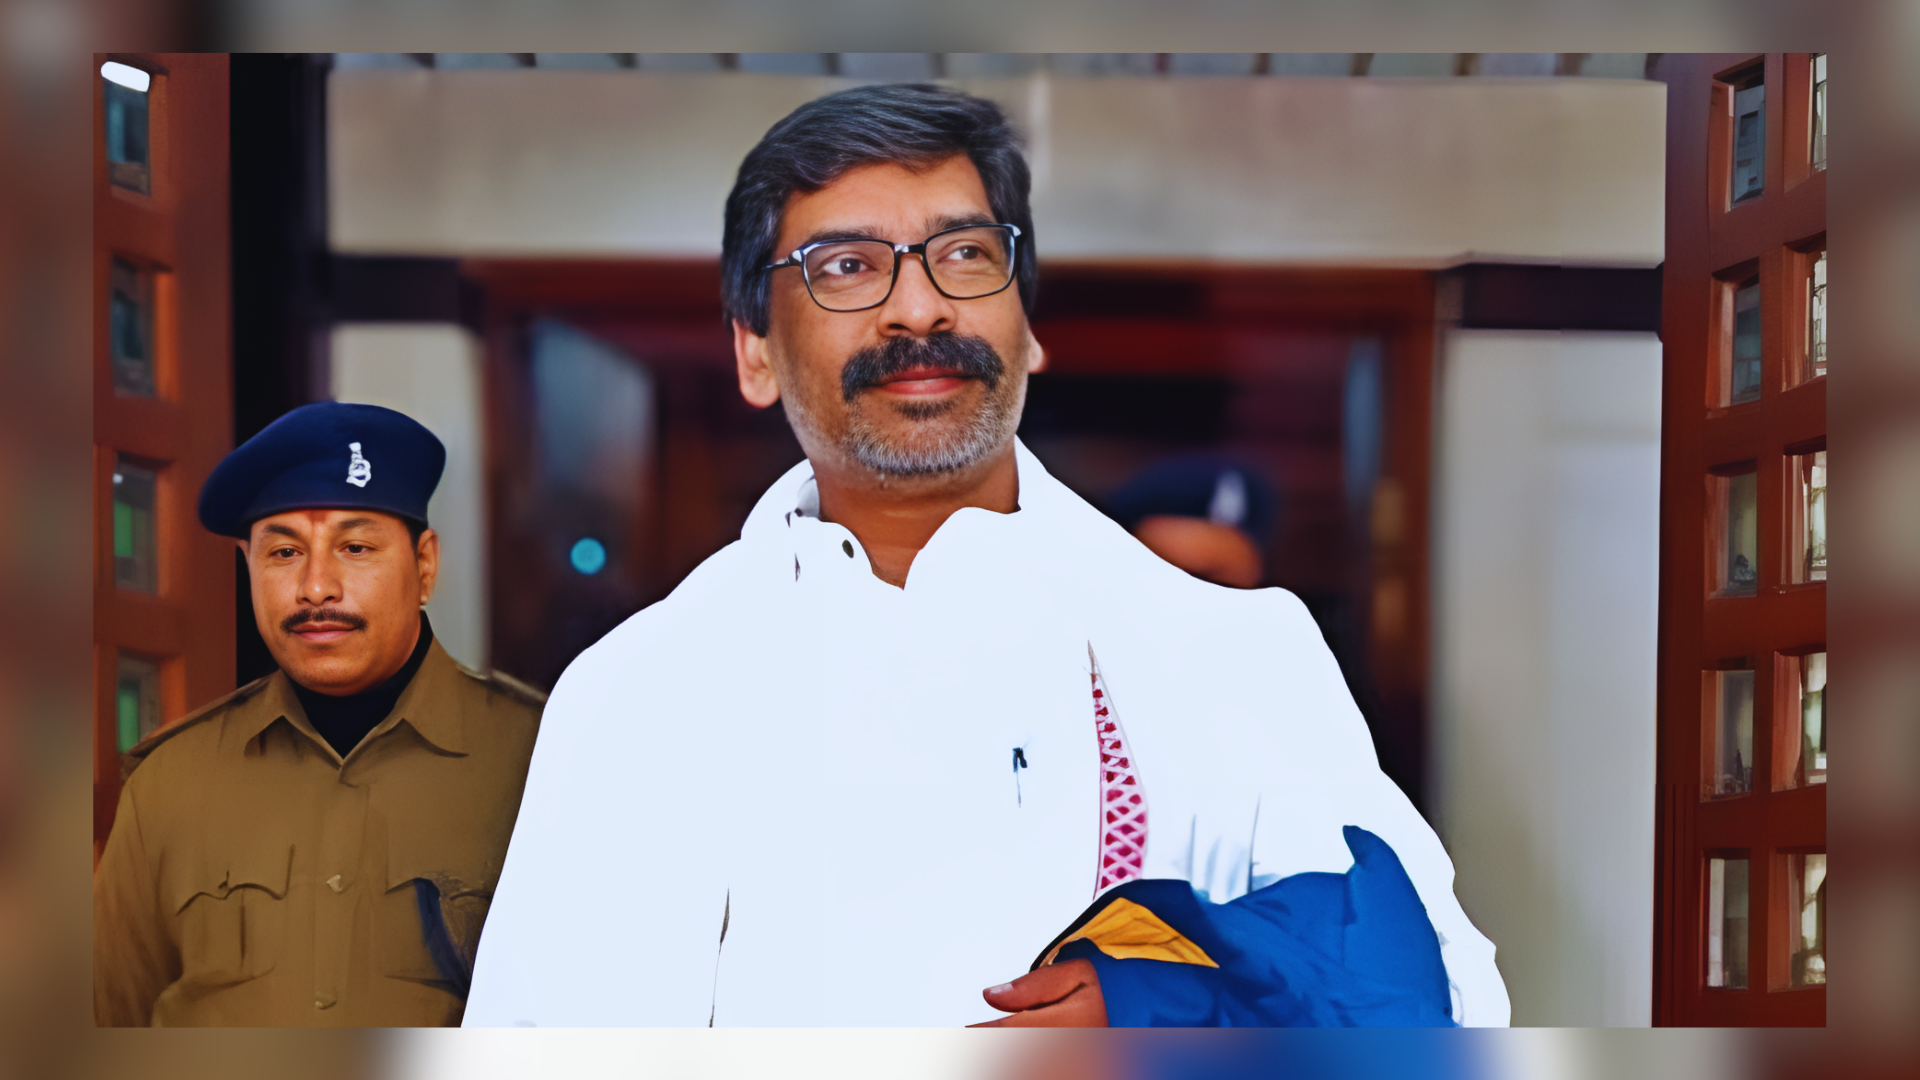 Hemant Soren Sworn In As Chief Minister, From Jail To Jharkhand’s Helm